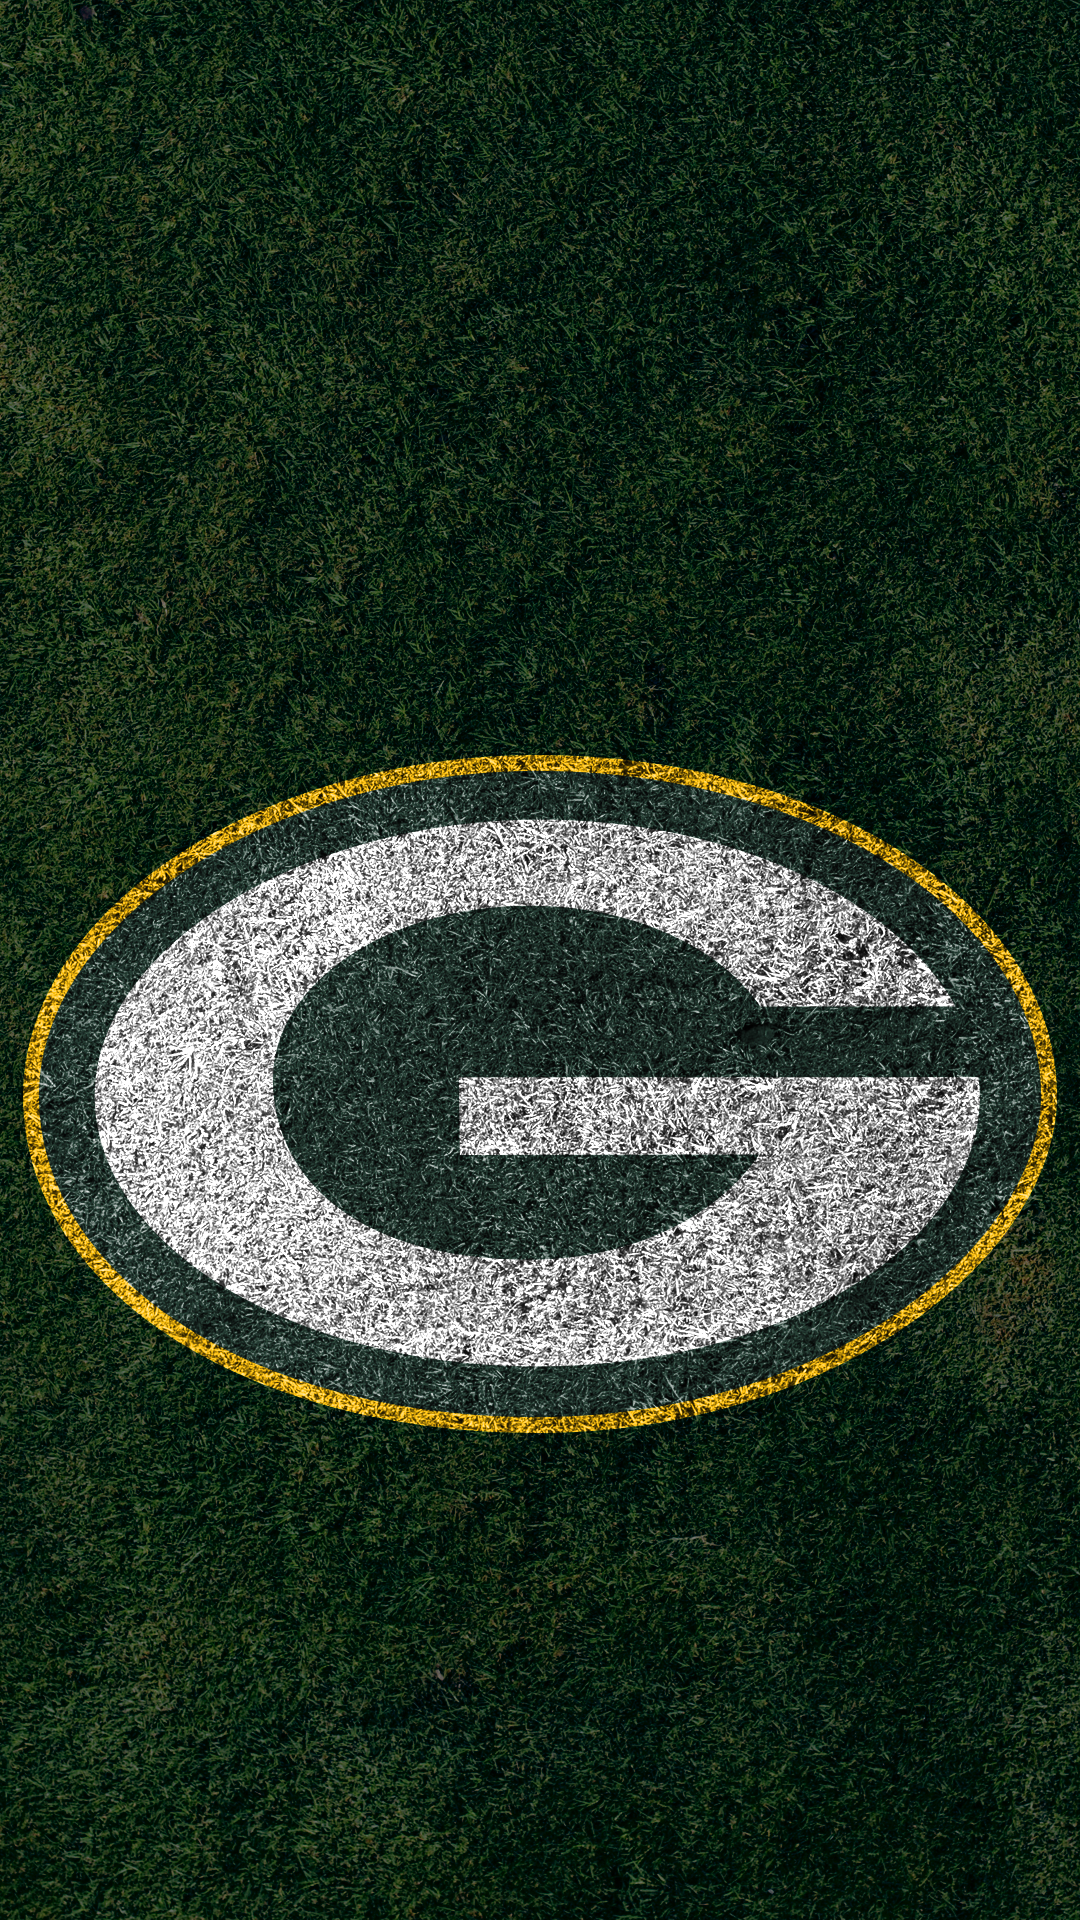 1080x1920 Green Bay Packers Mobile Logo Wallpaper | Green bay packers wallpaper, Green bay packers logo, Green bay packers